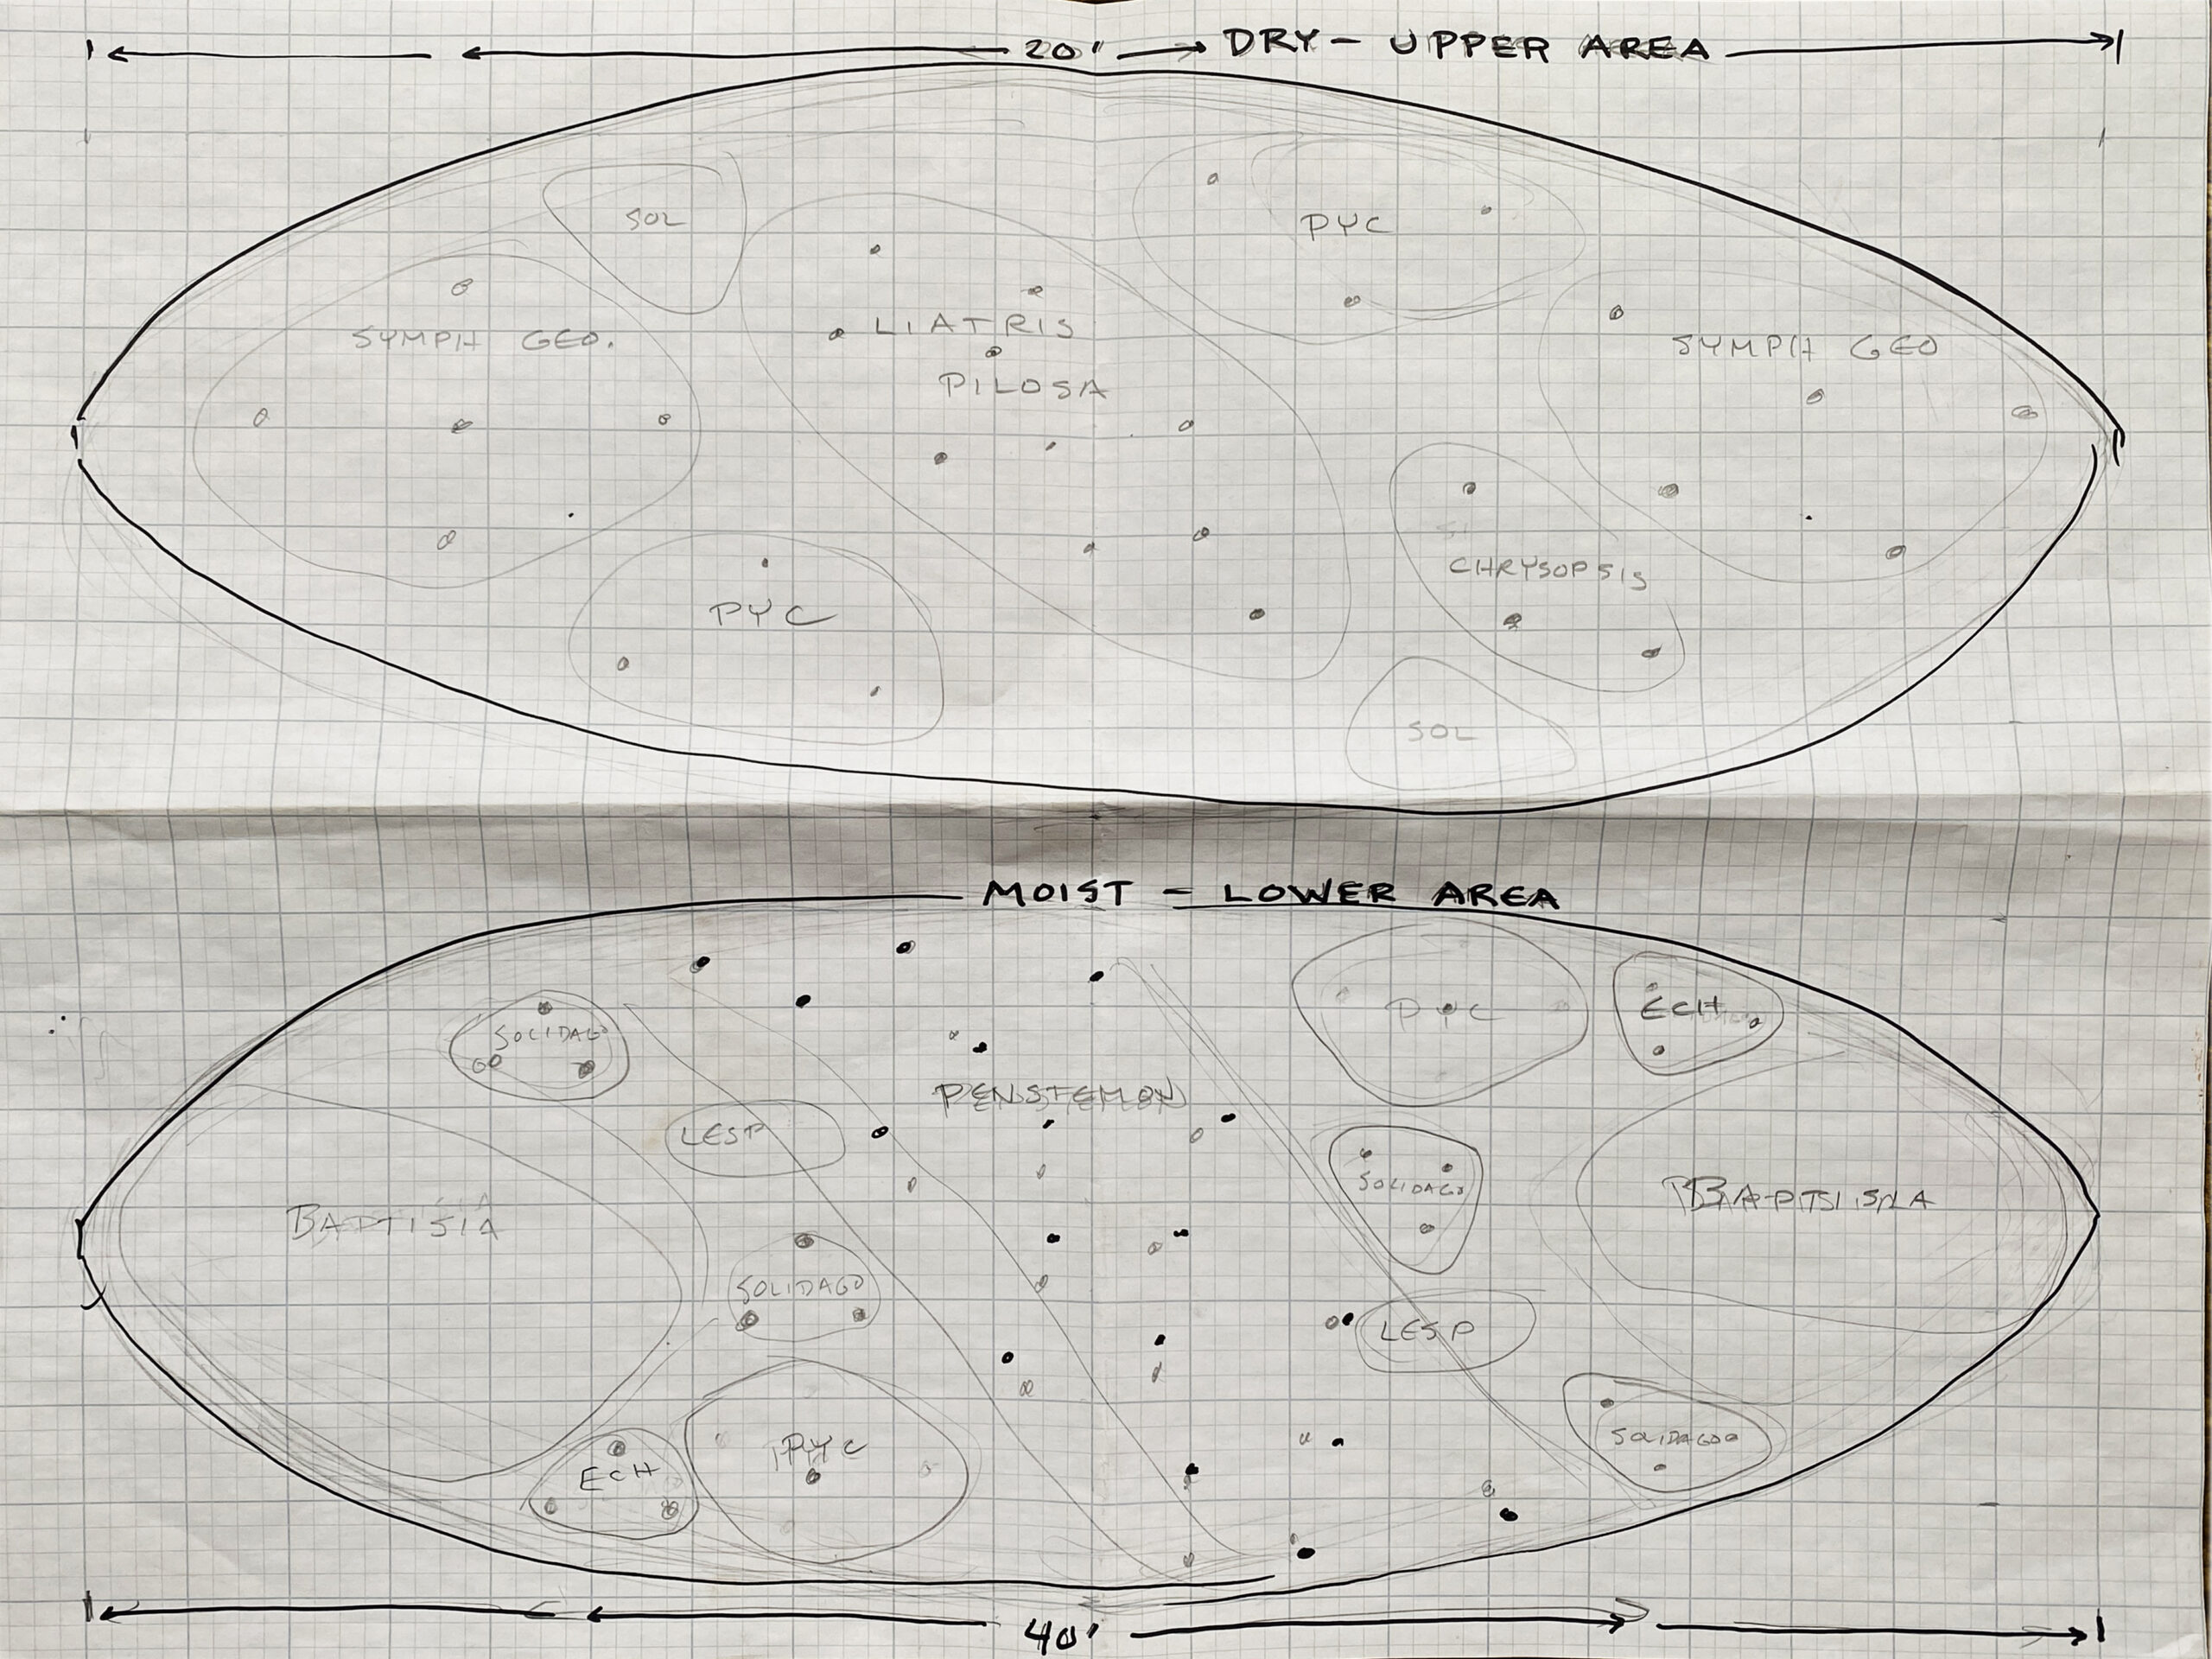 Planting plans for the prairie ellipses. The total area is currently 520 feet long by 155 feet wide. There are plans to enlarge the area to 15 acres.